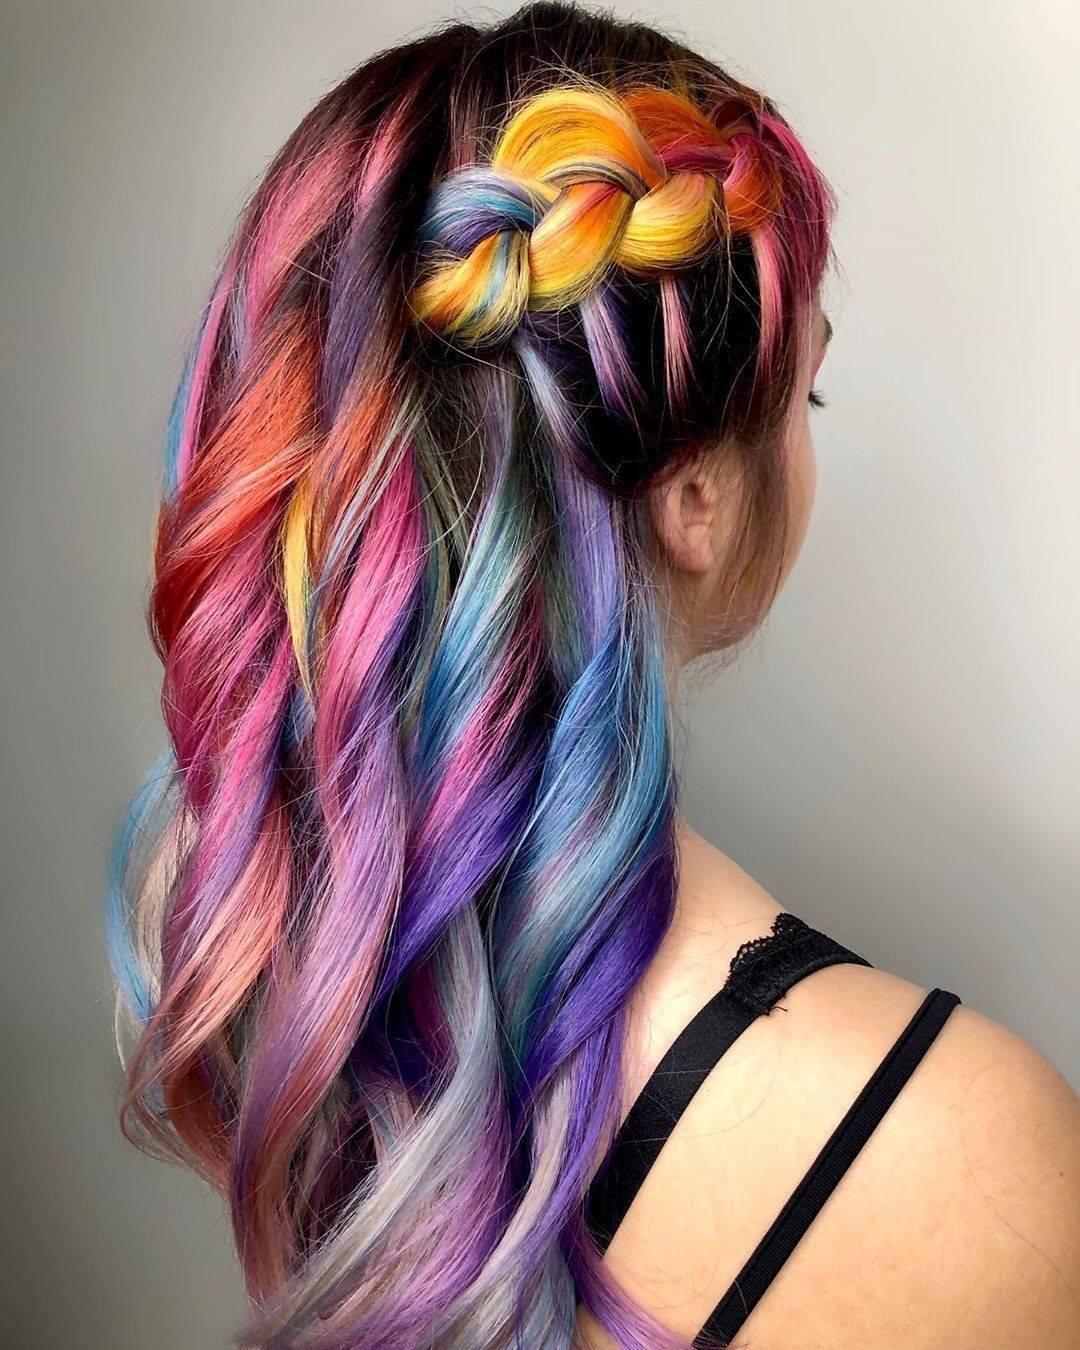 Schwarzkopf Professional - Candy canes or rainbows? You decide! 🎨

*Formula* 👉  @ricky_and_robbie coloured with #ChromaID on a pre-lightened base (6% –natural base 5):
•
Pink –Pink + White (1:2), and...